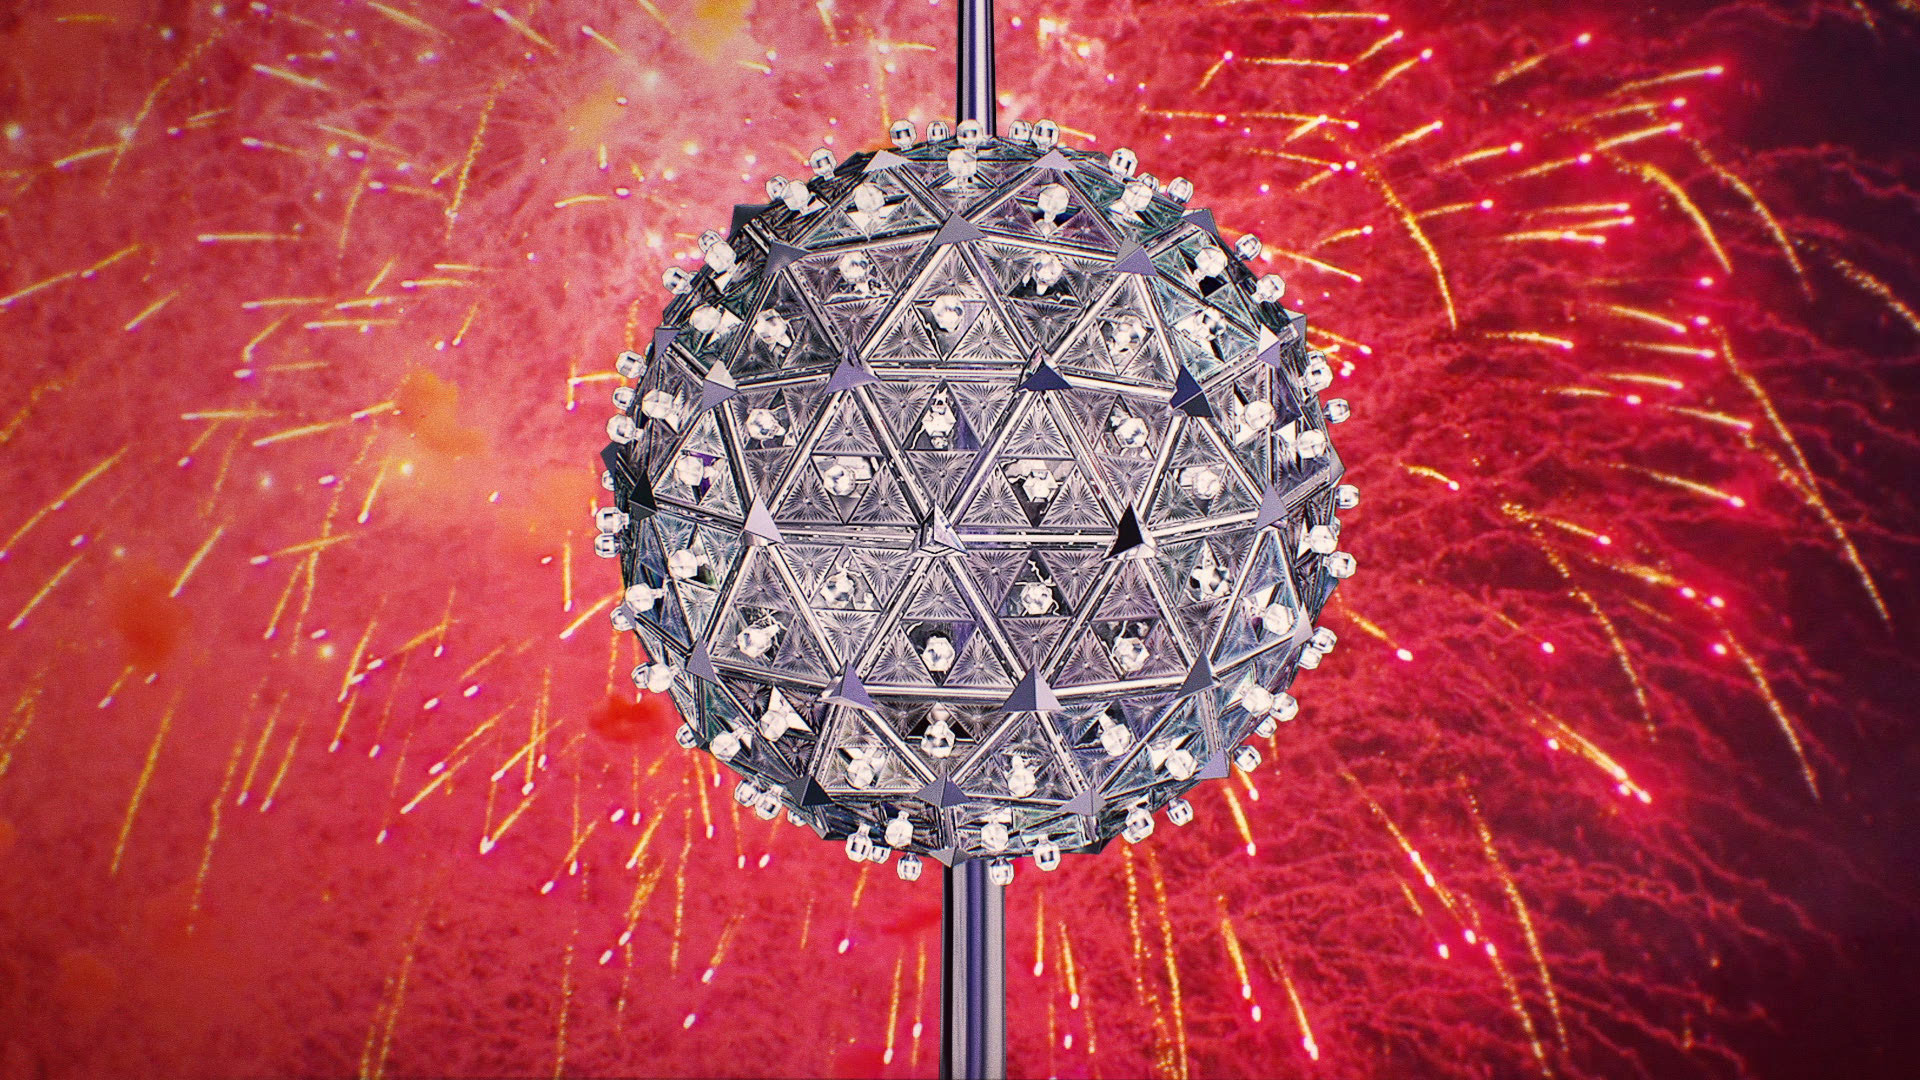 New Year's Eve Ball Drop